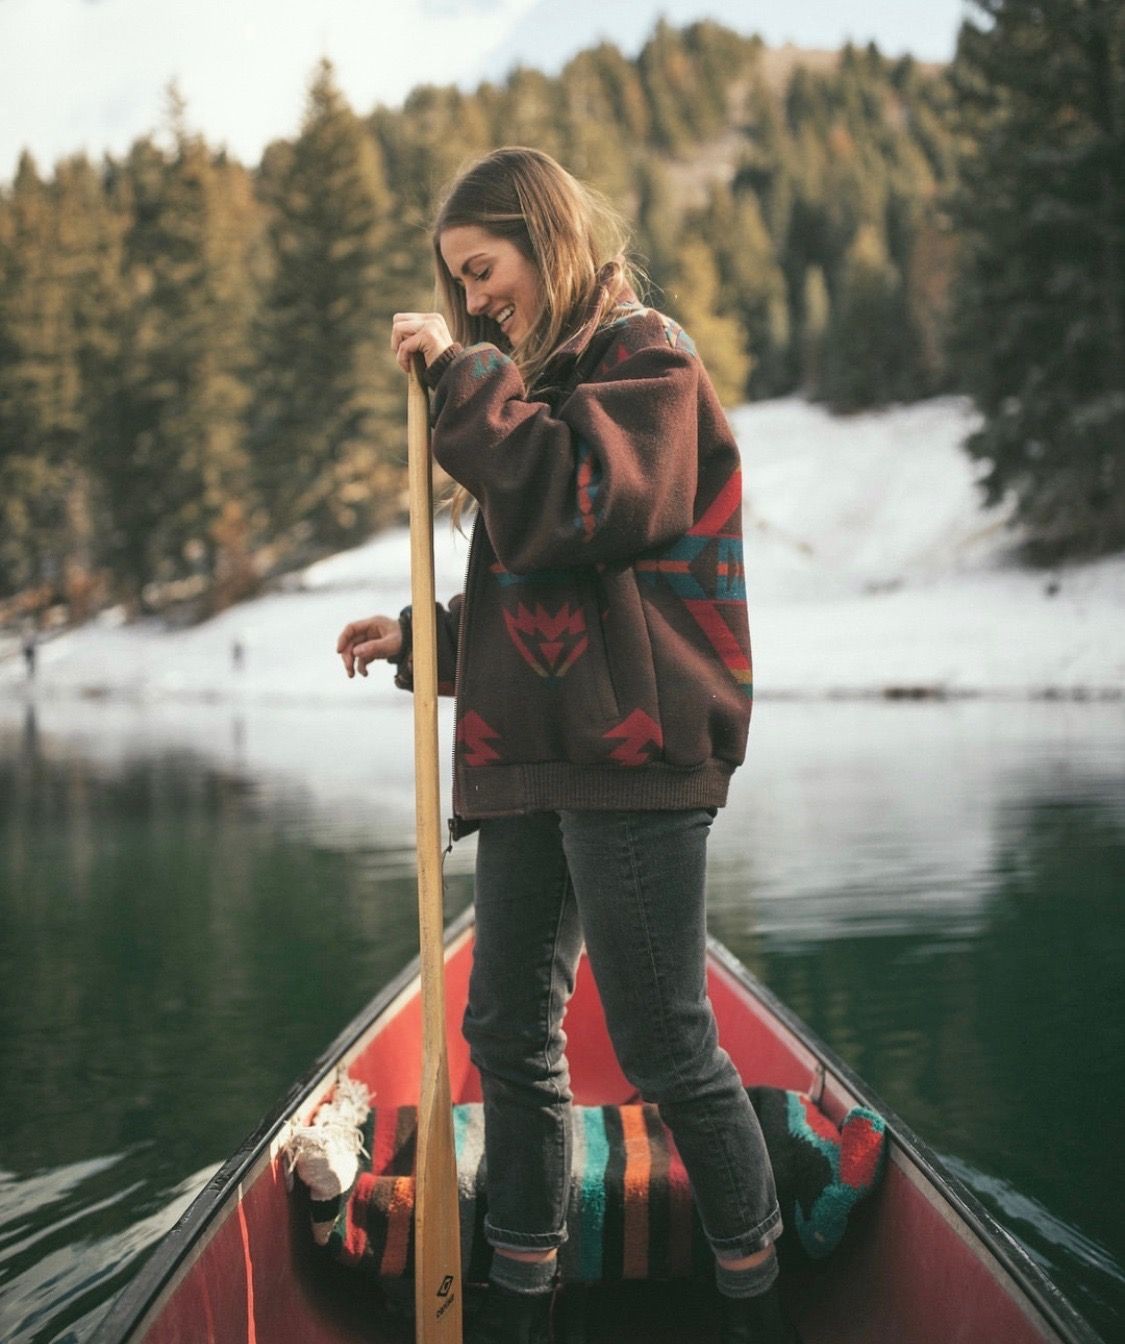 Beautiful clothing ideas outdoors aesthetic outfits, fashion photography, outdoor clothing: Fashion photography,  Hiking Outfits  